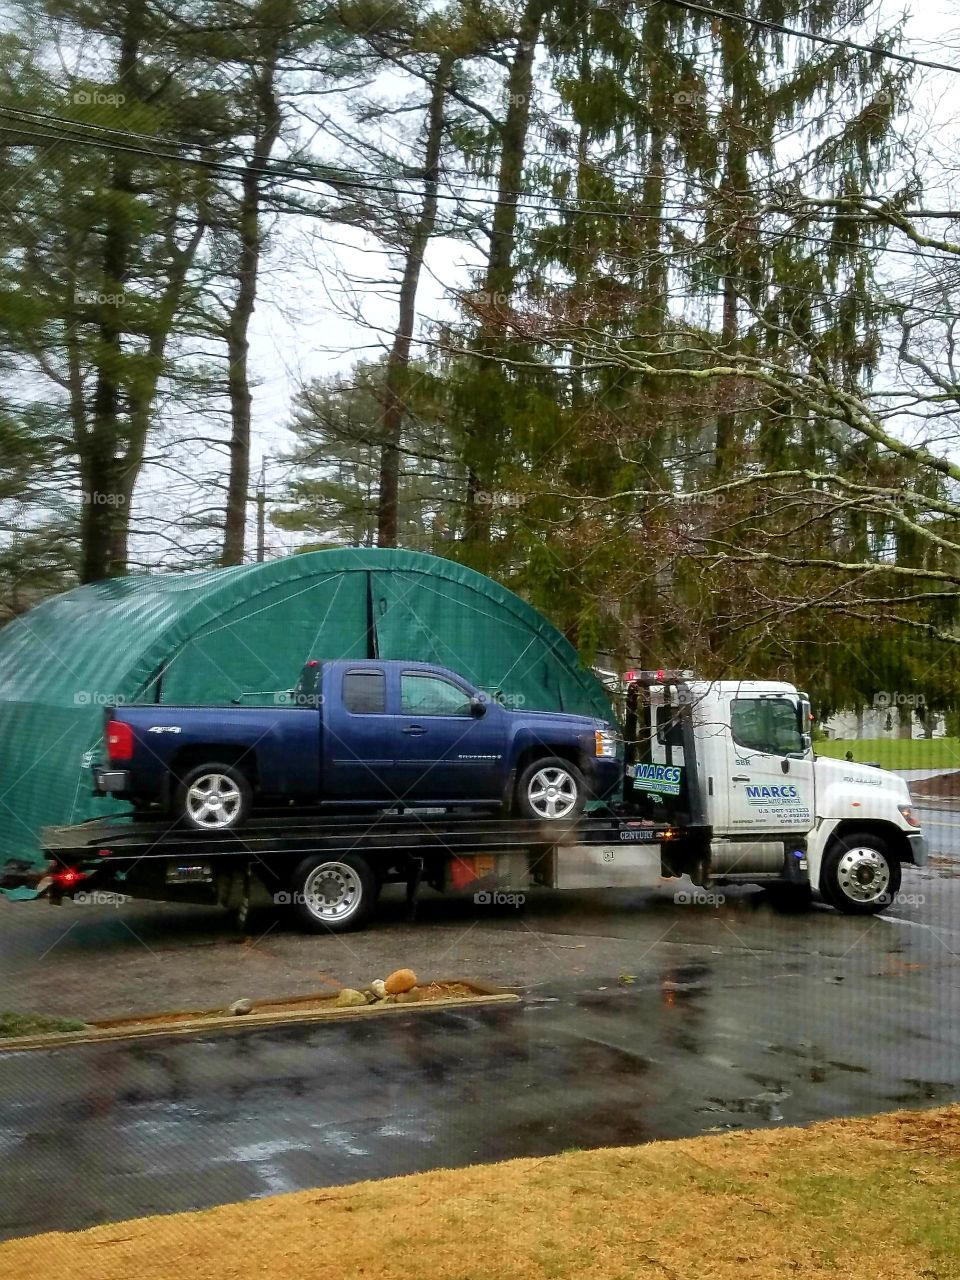 Pickup truck on flatbed tow truck leaving in rain to get repaired, vehicles are ready to go.